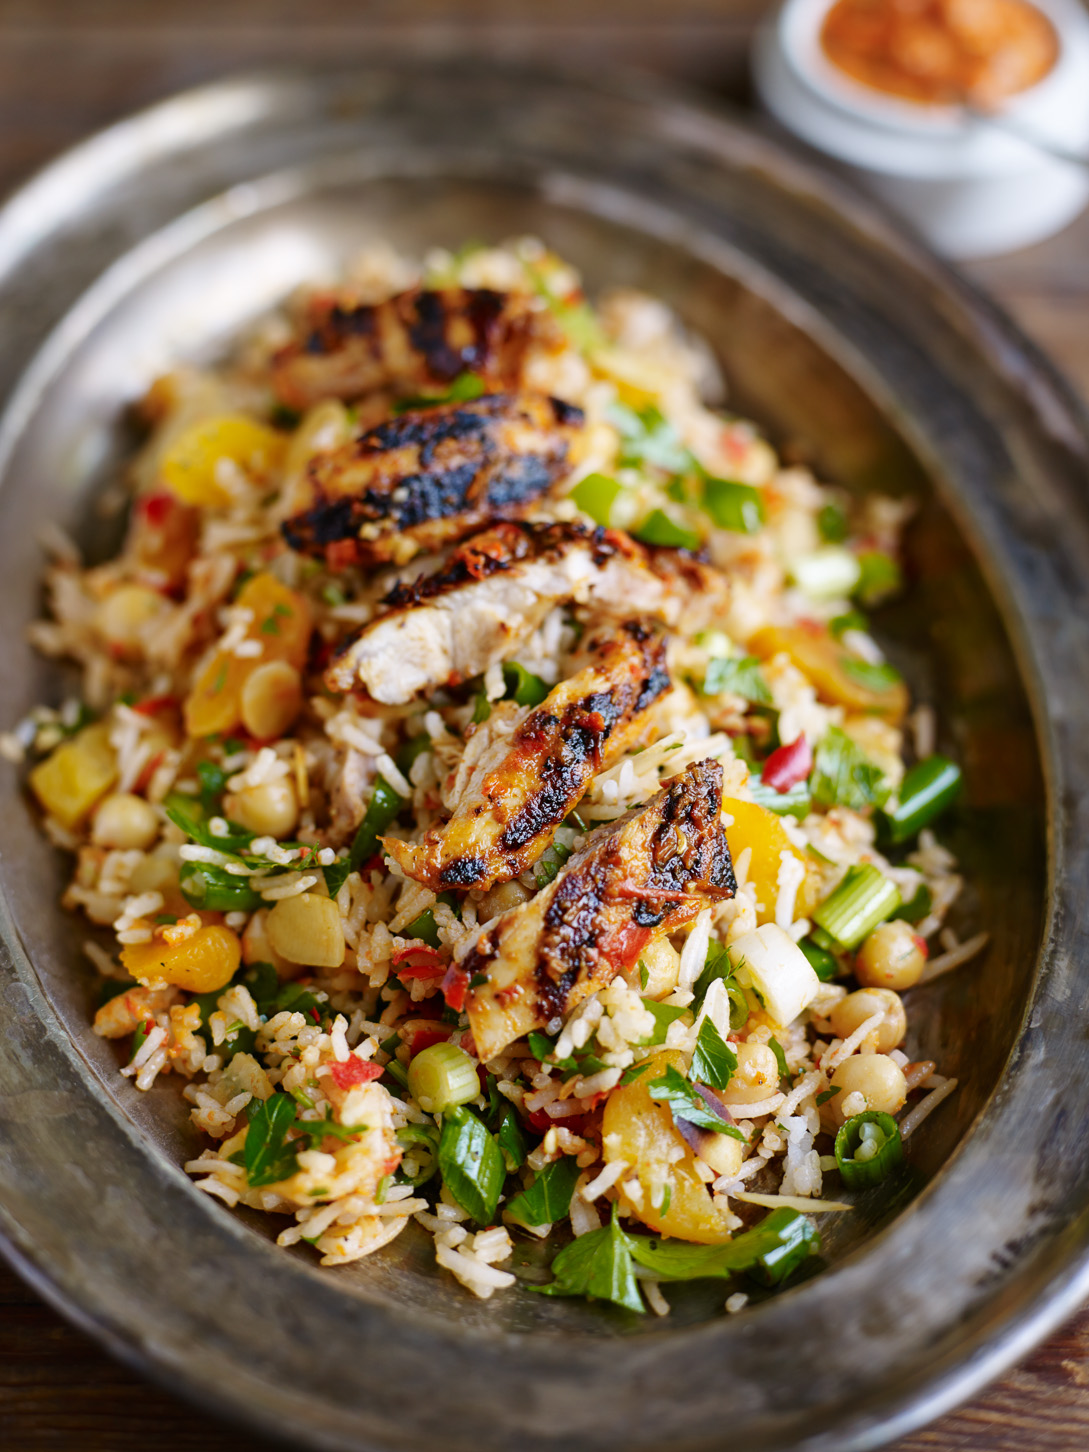 Moroccan Amira Rice Salad with Harissa Chicken, Apricots and Chickpeas